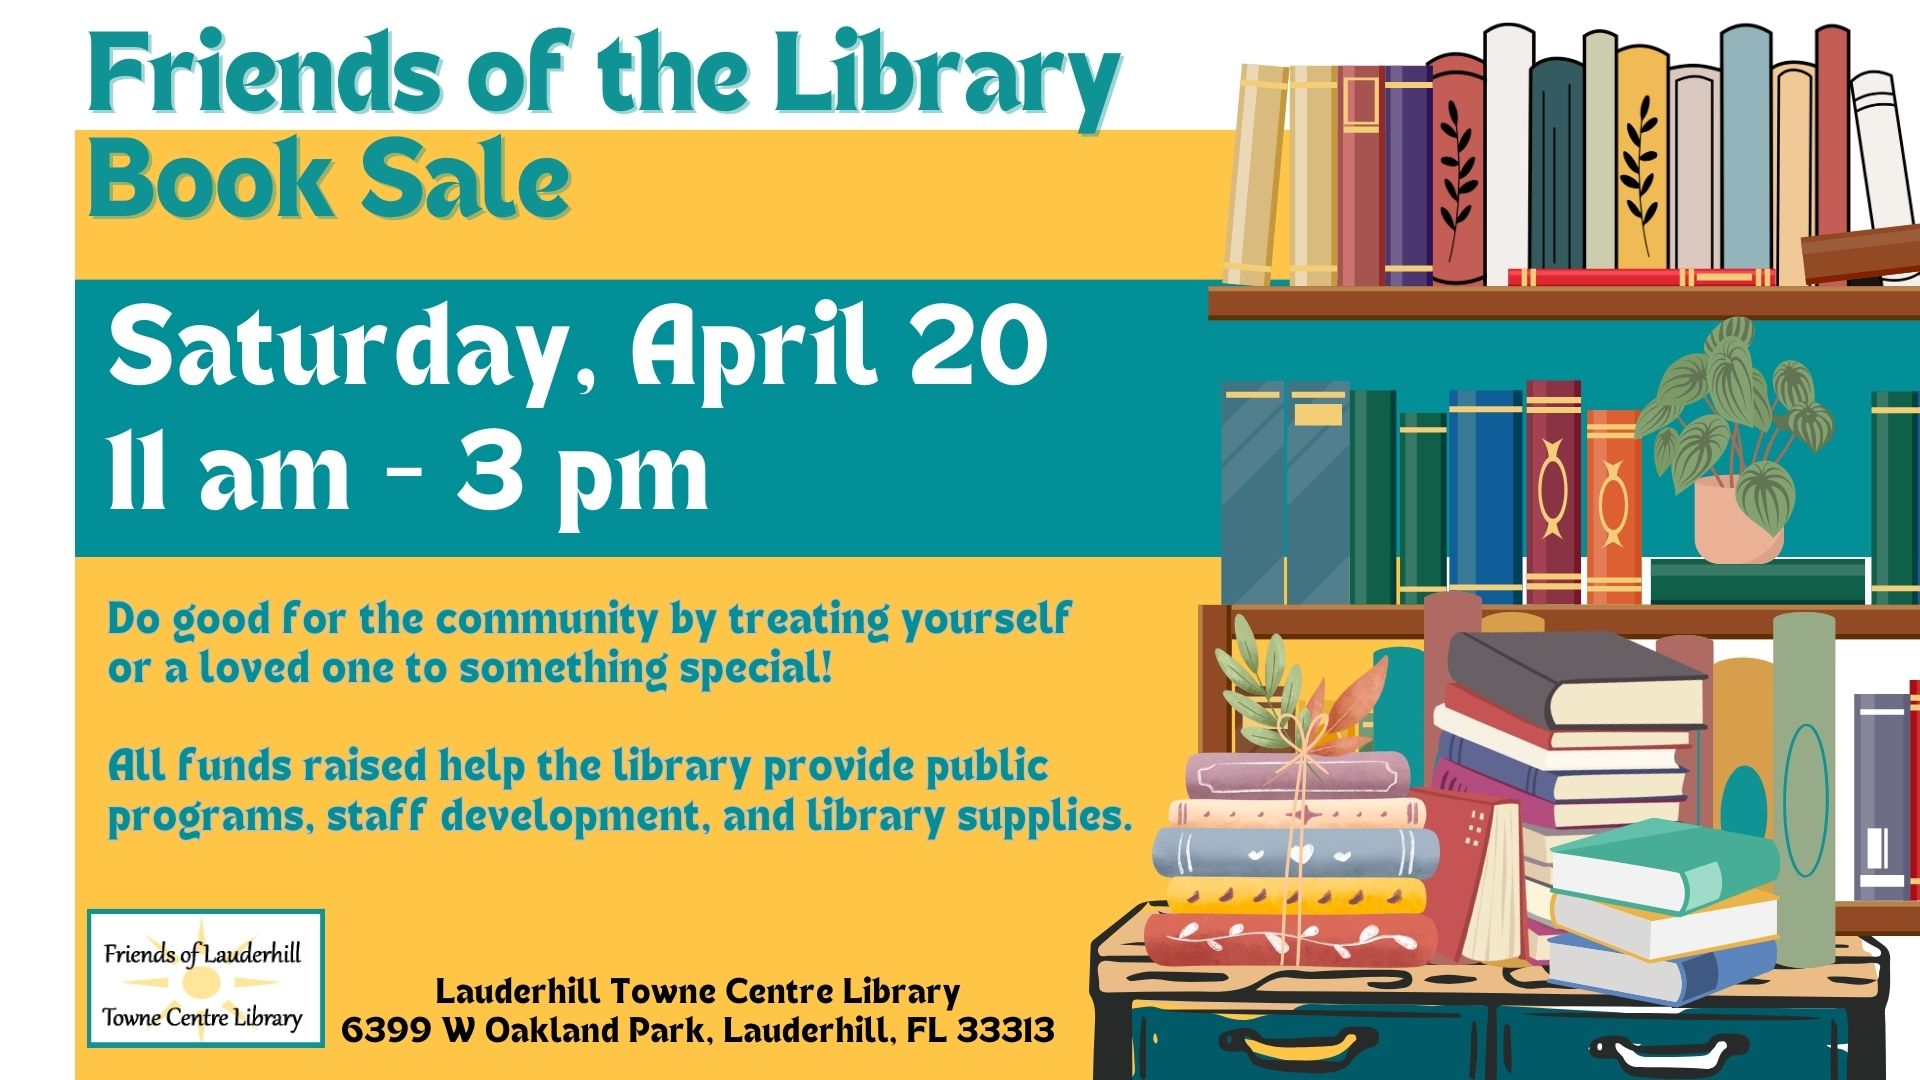 Friends of the Lauderhill Towne Centre Library Book Sale ...